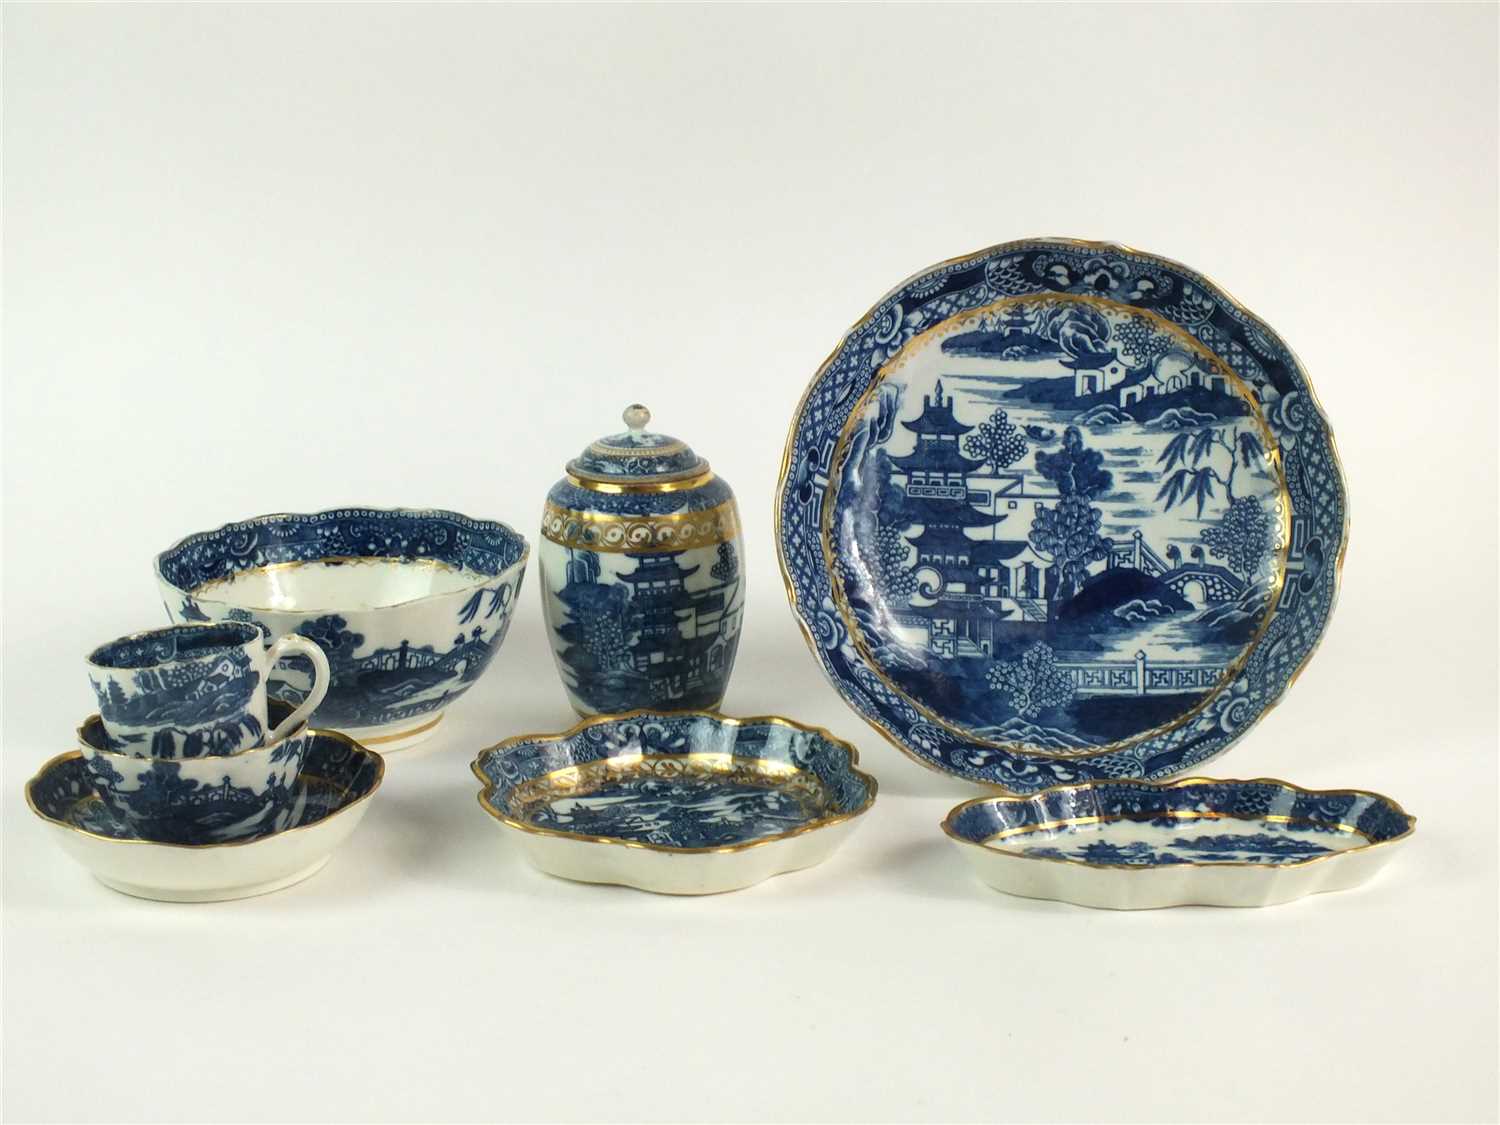 Lot 53 - Eight pieces of Caughley porcelain